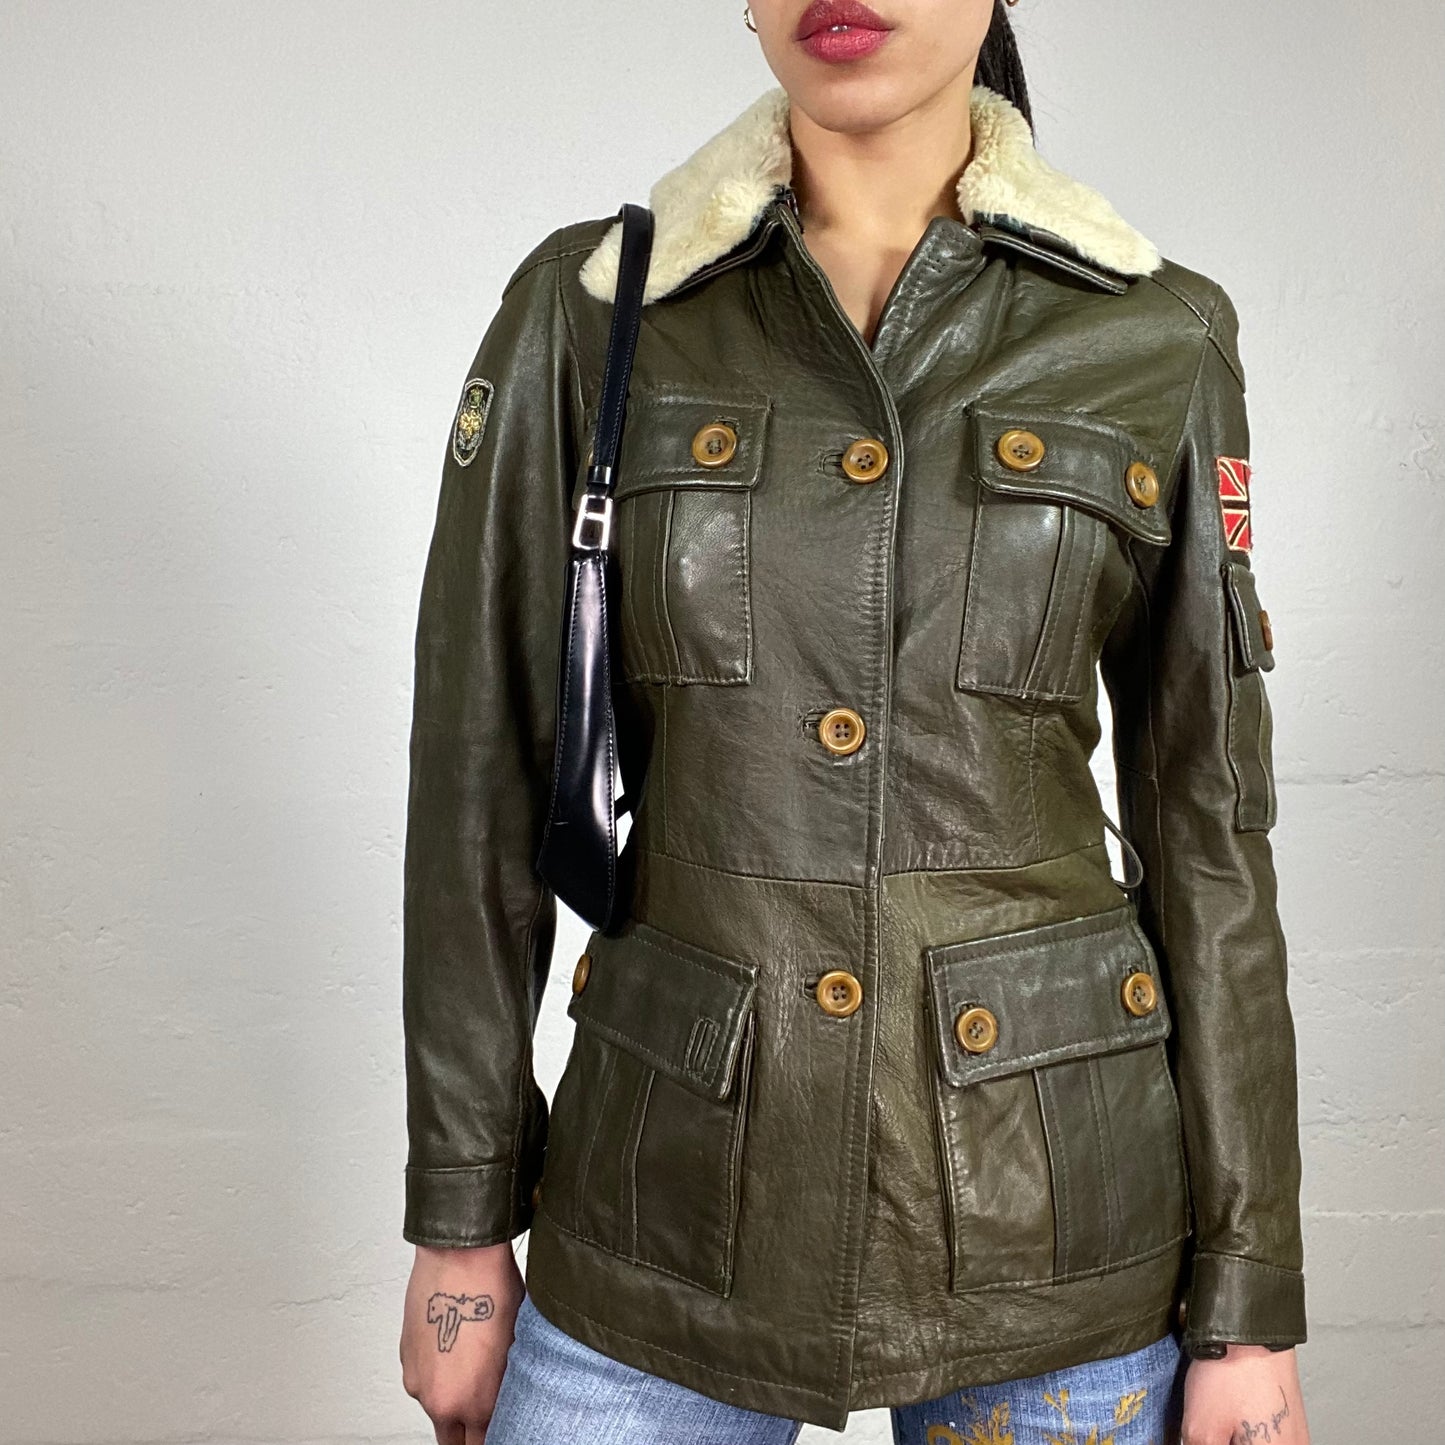 Vintage 90's Uniform Style Khaki Green Button Up Leather Jacket with Teddy Fur Collar (42)